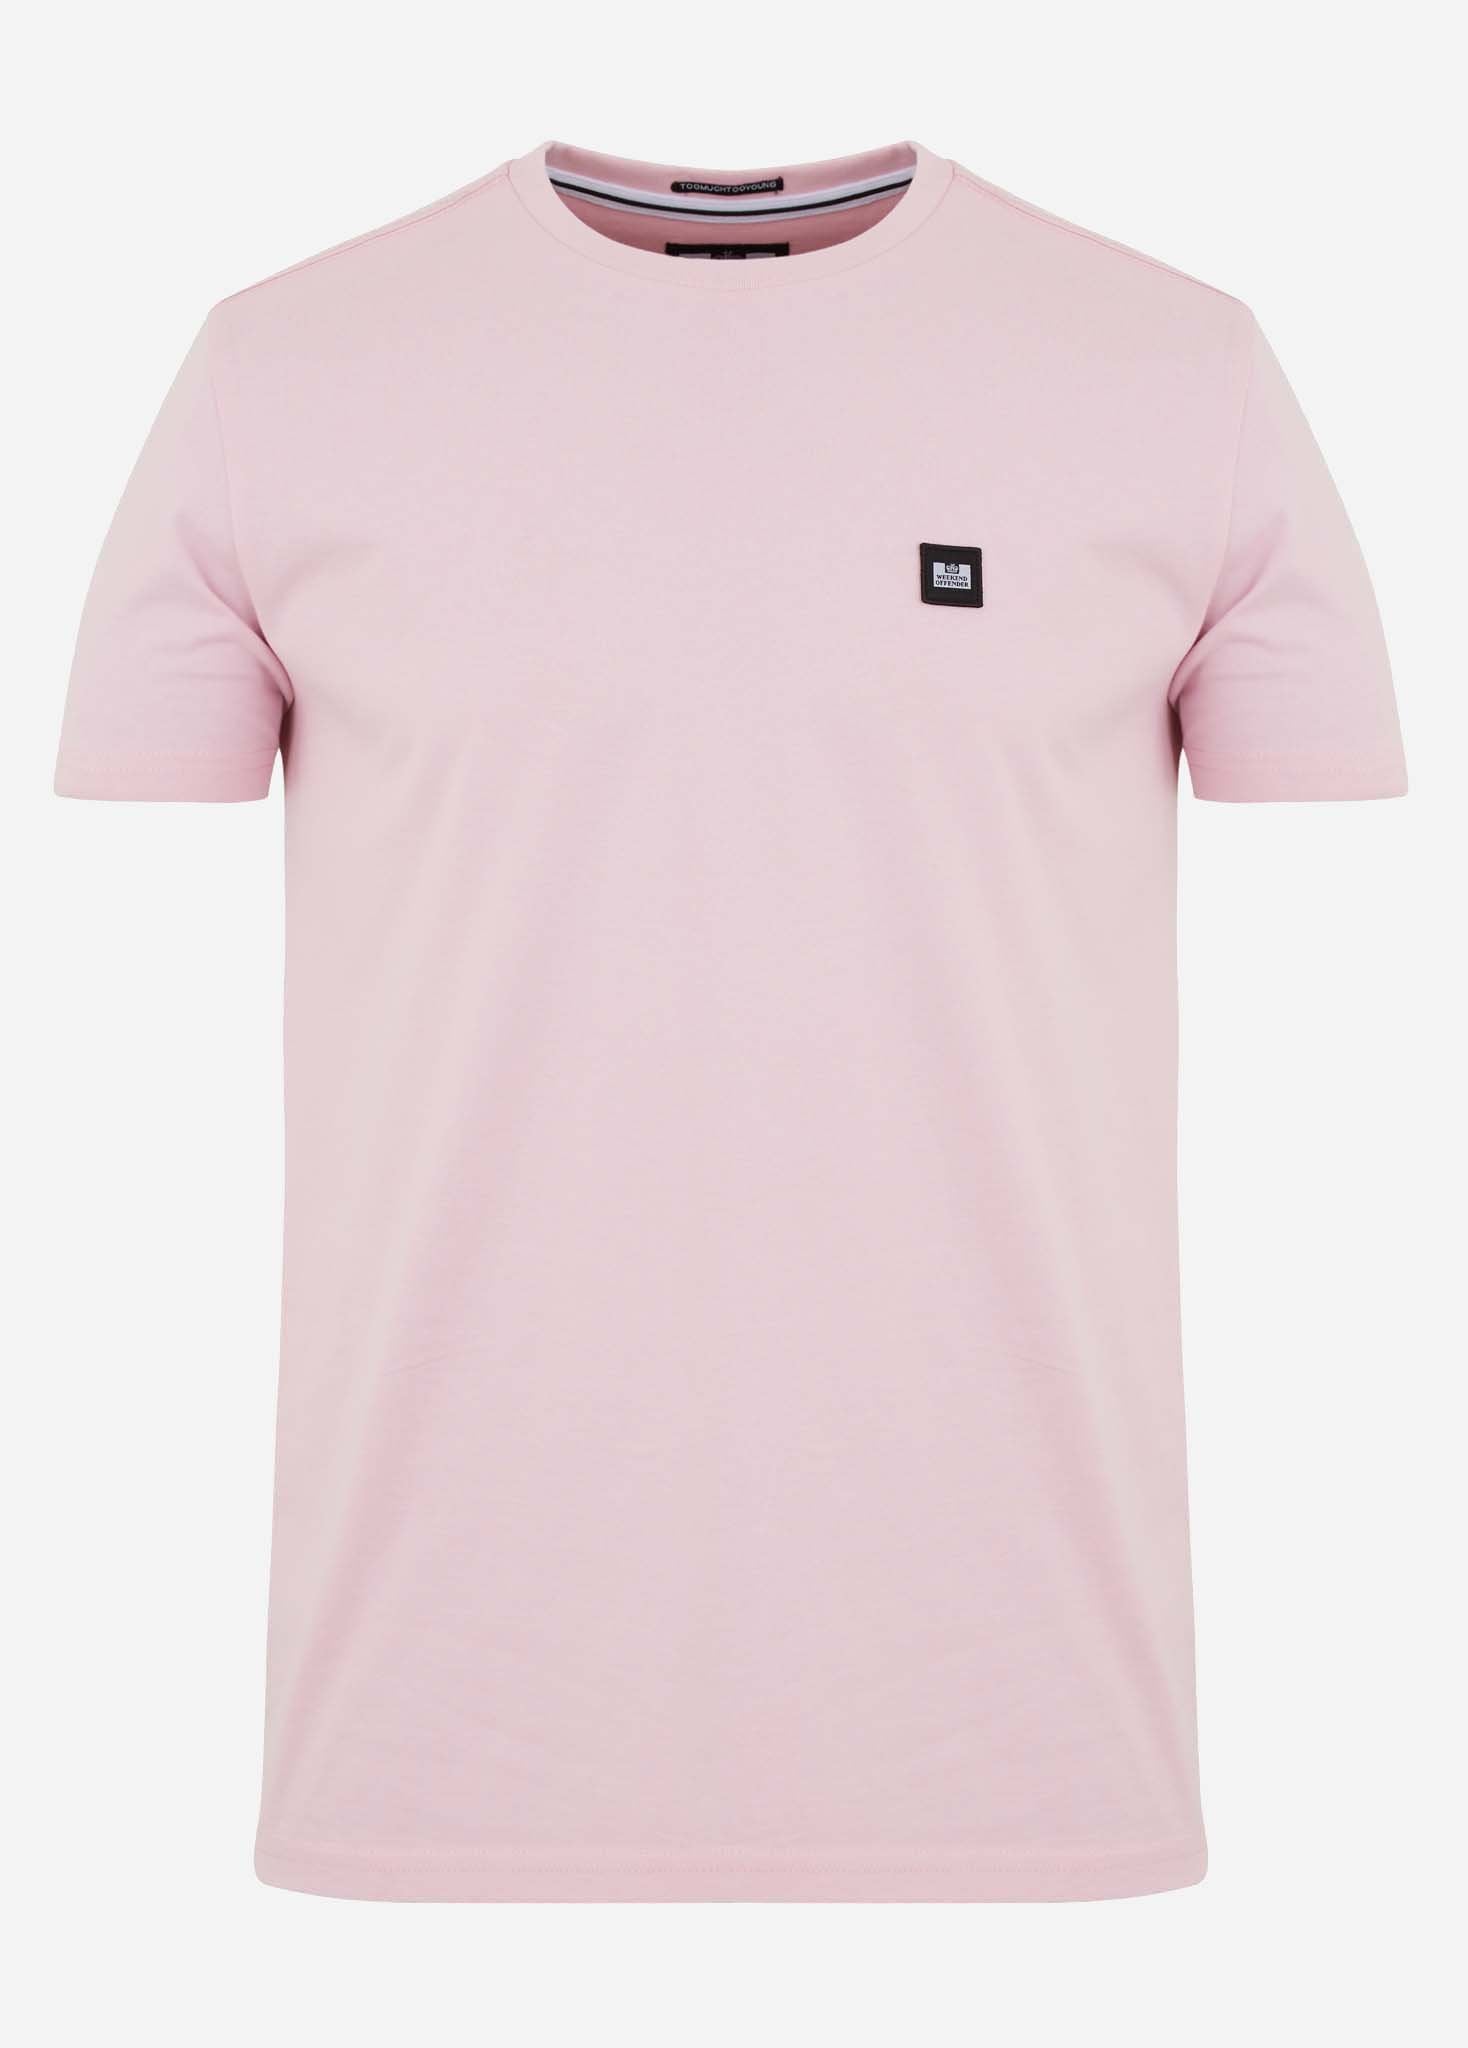 Weekend Offender T-shirts  Cannon beach - marshmallow 